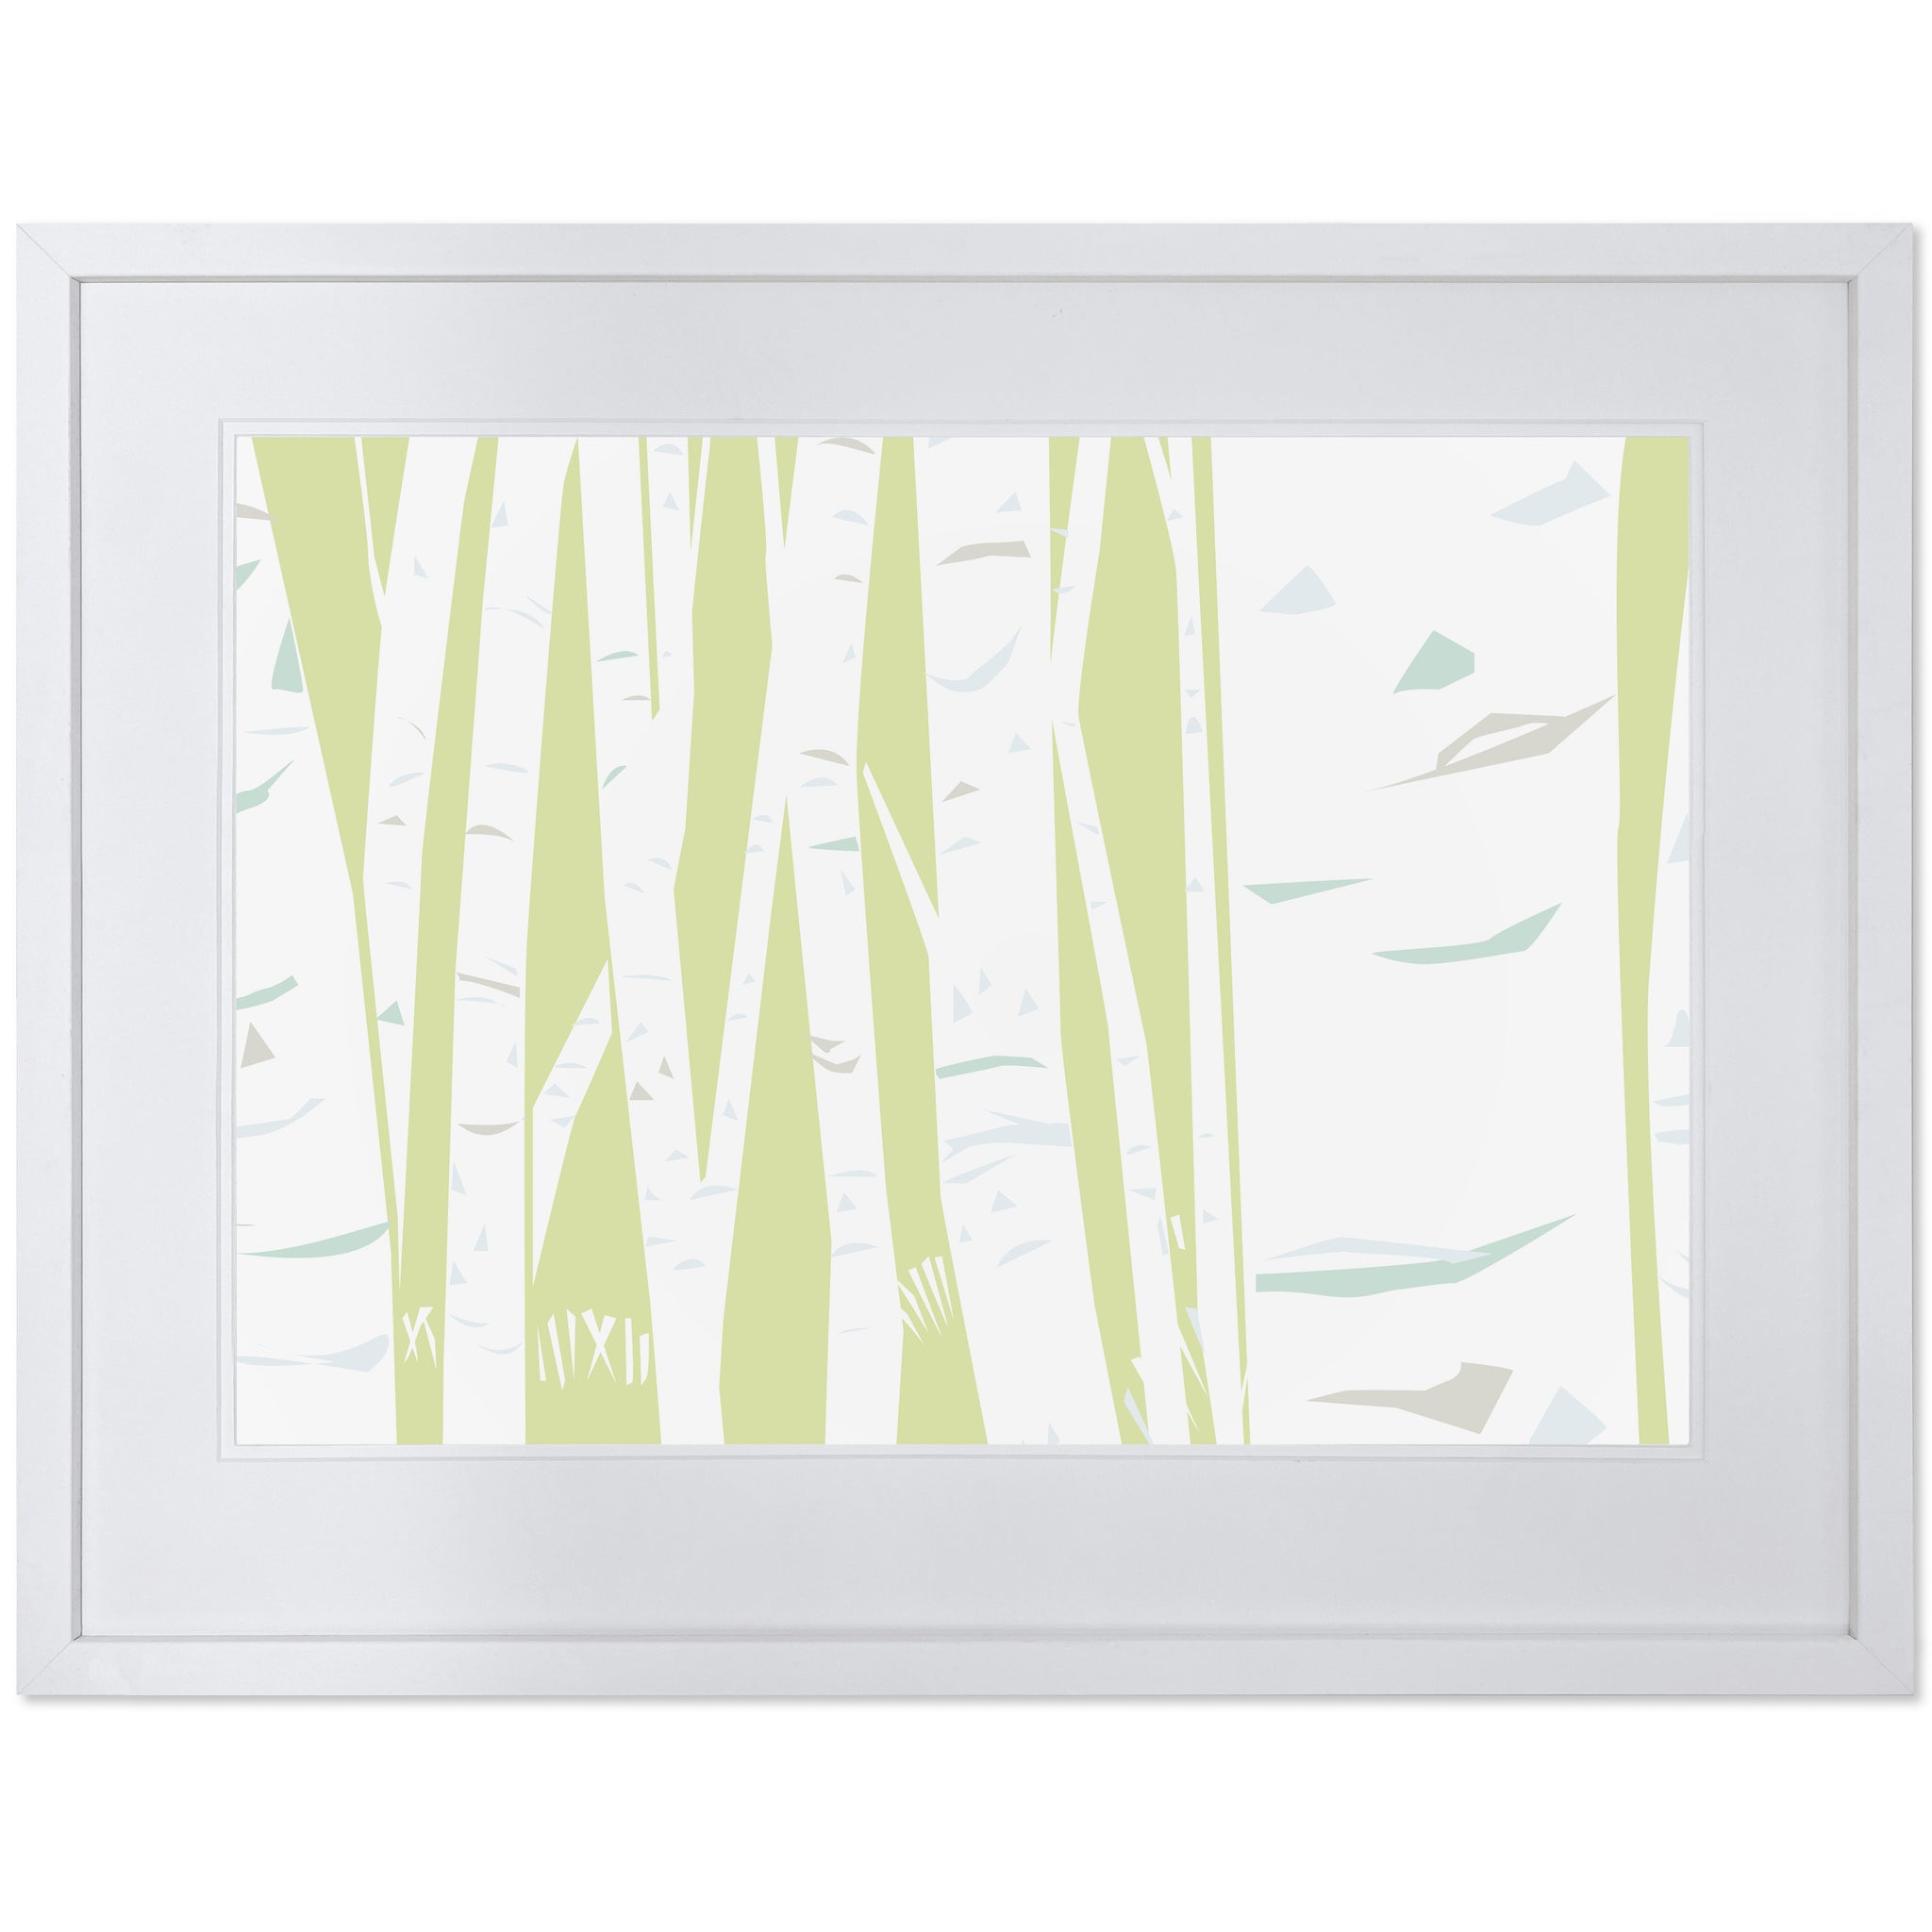 Maine Cottage Birches - Sprout by Gene Barbera for Maine Cottage® 